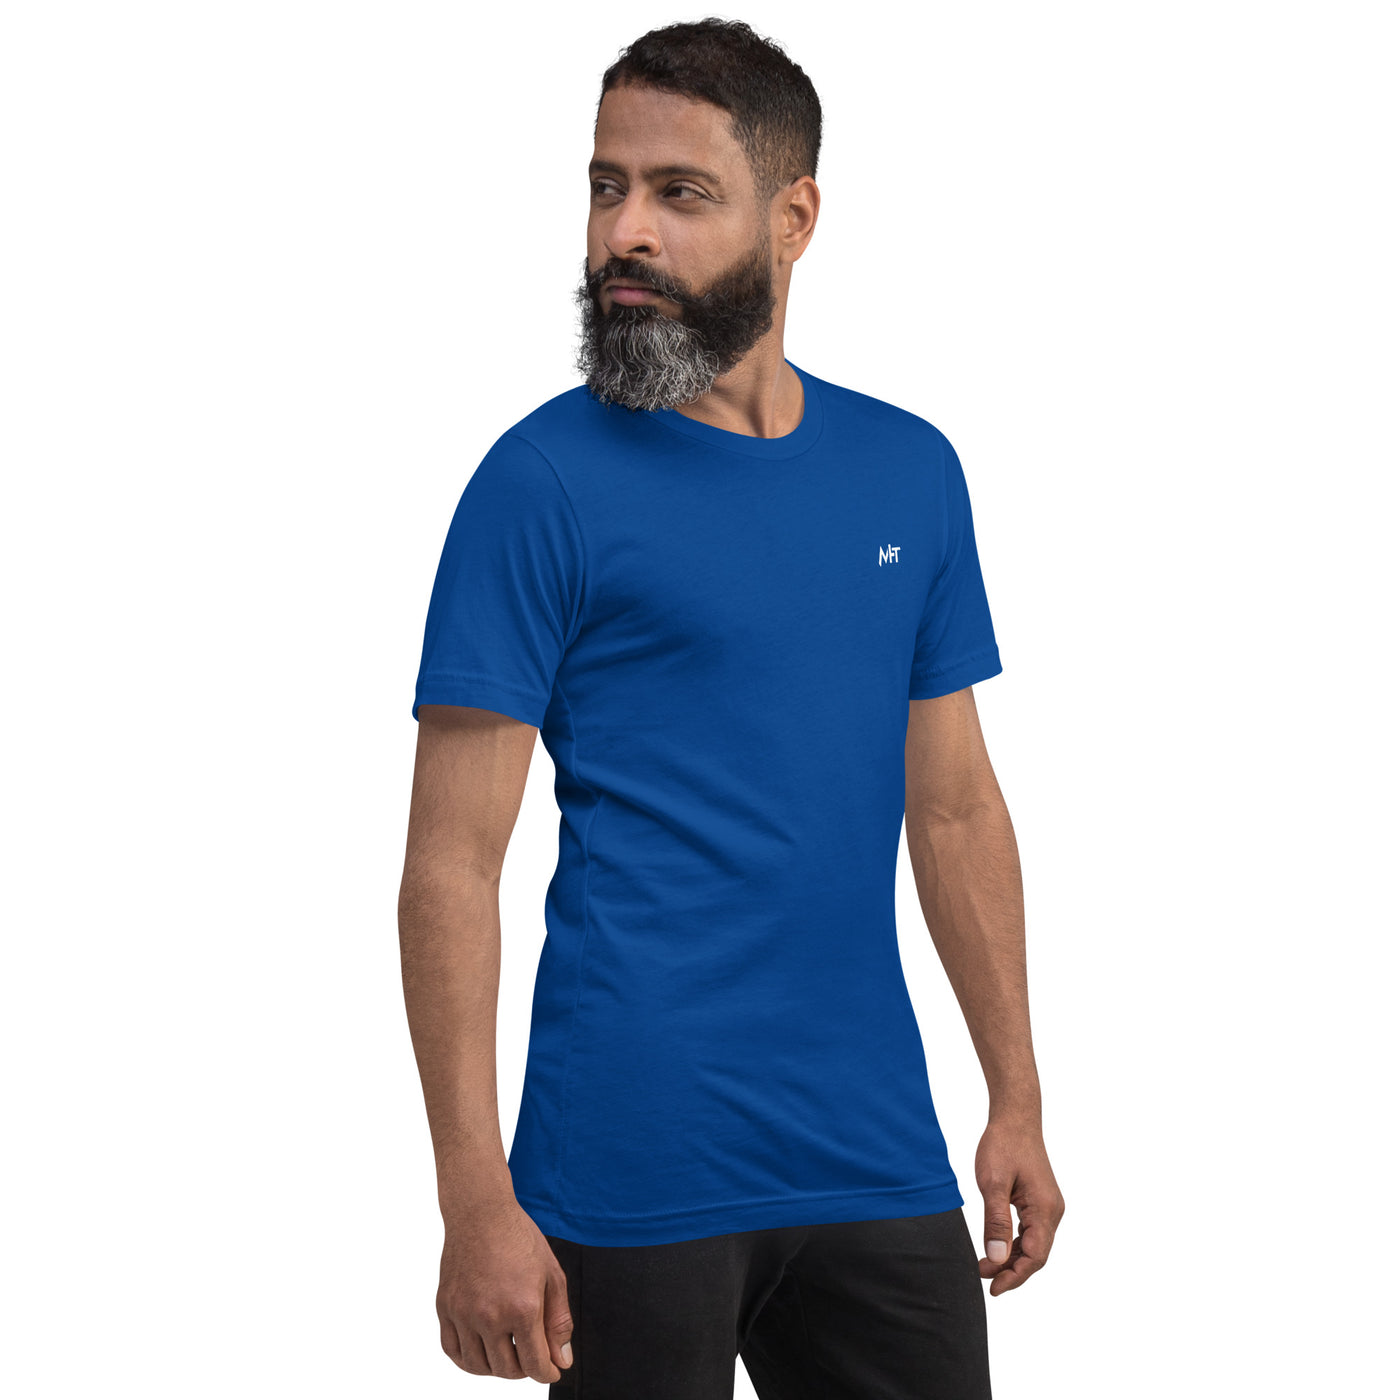 Computers are fast - Blue RK Unisex t-shirt ( Back Print )